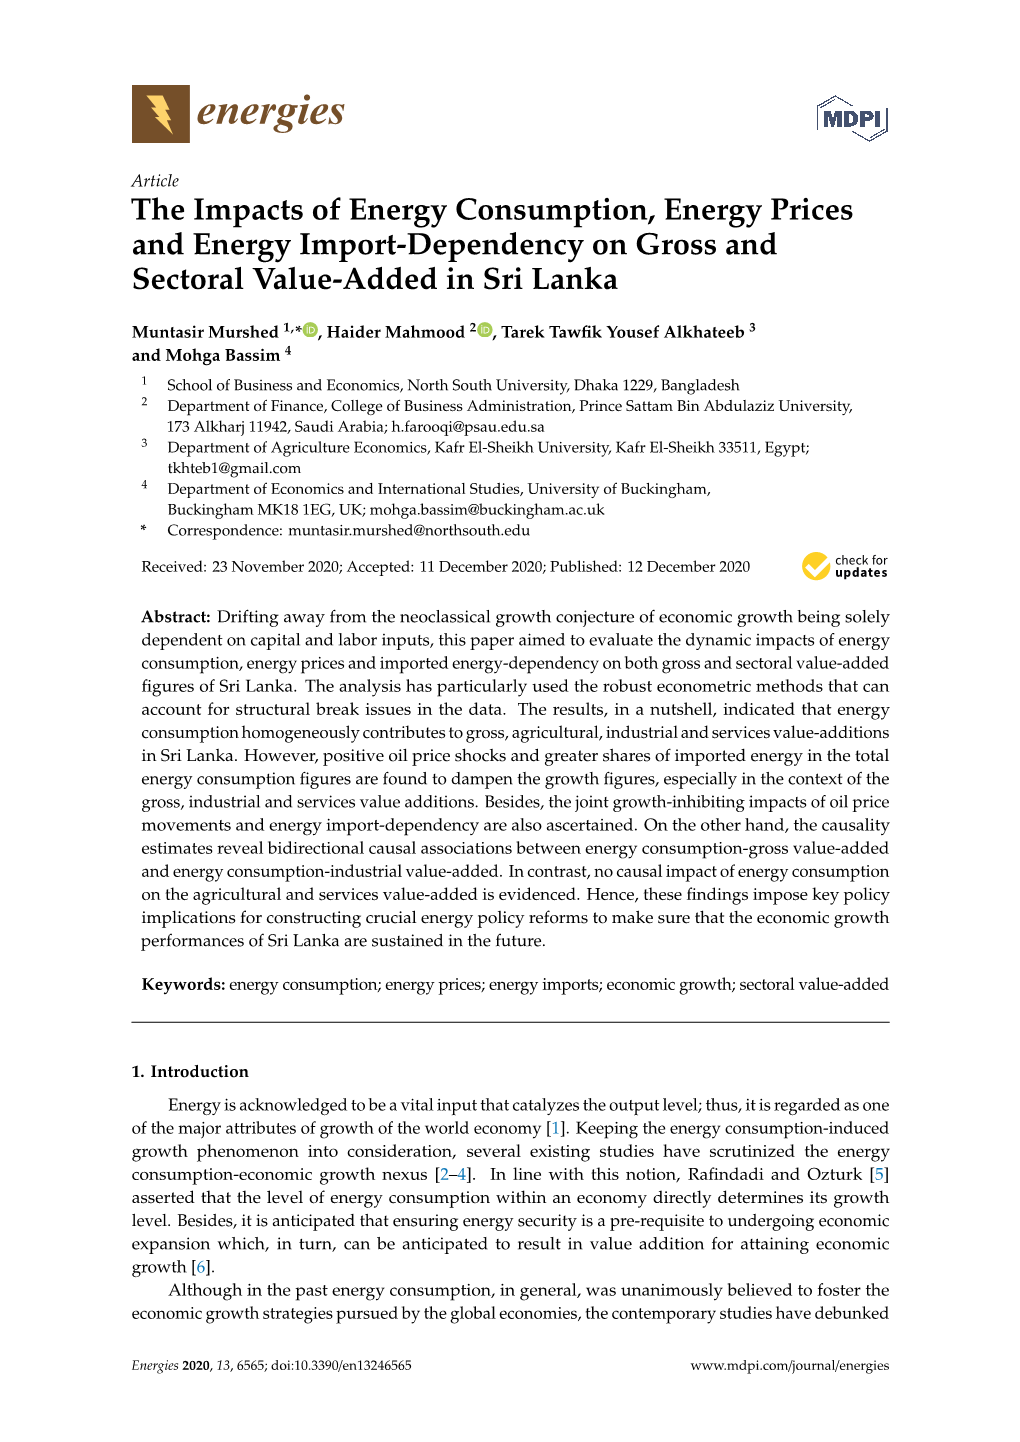 The Impacts of Energy Consumption, Energy Prices and Energy Import-Dependency on Gross and Sectoral Value-Added in Sri Lanka